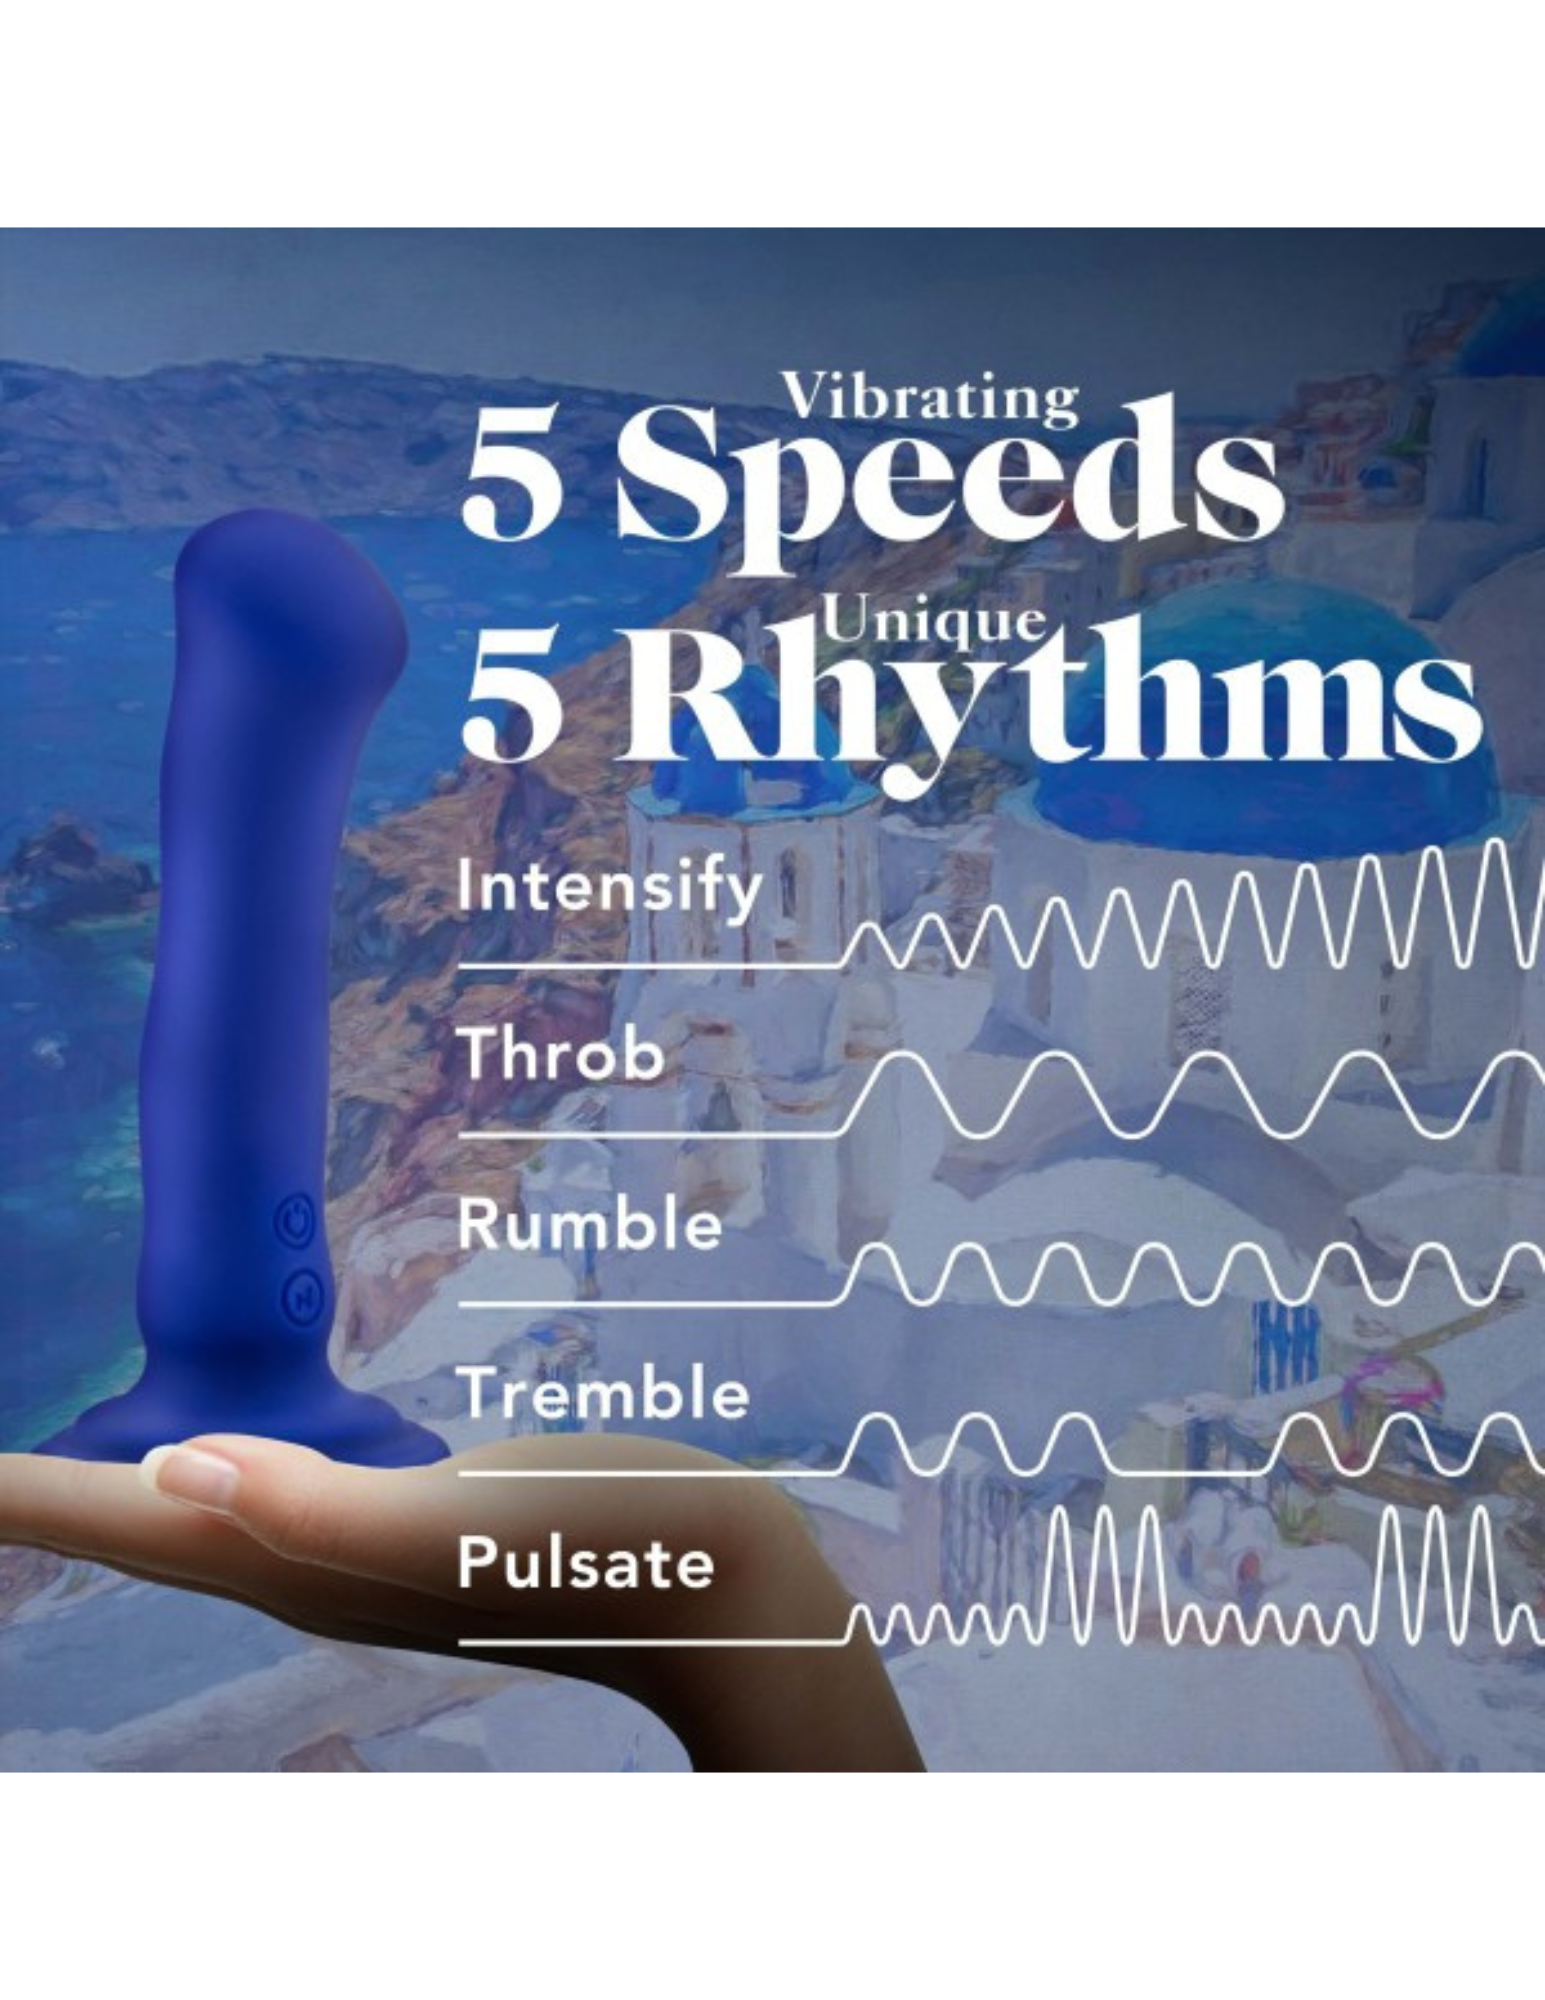 Image shows the variations in speeds and patterns of the Impressions Santorini Vibrator from Blush (blue).